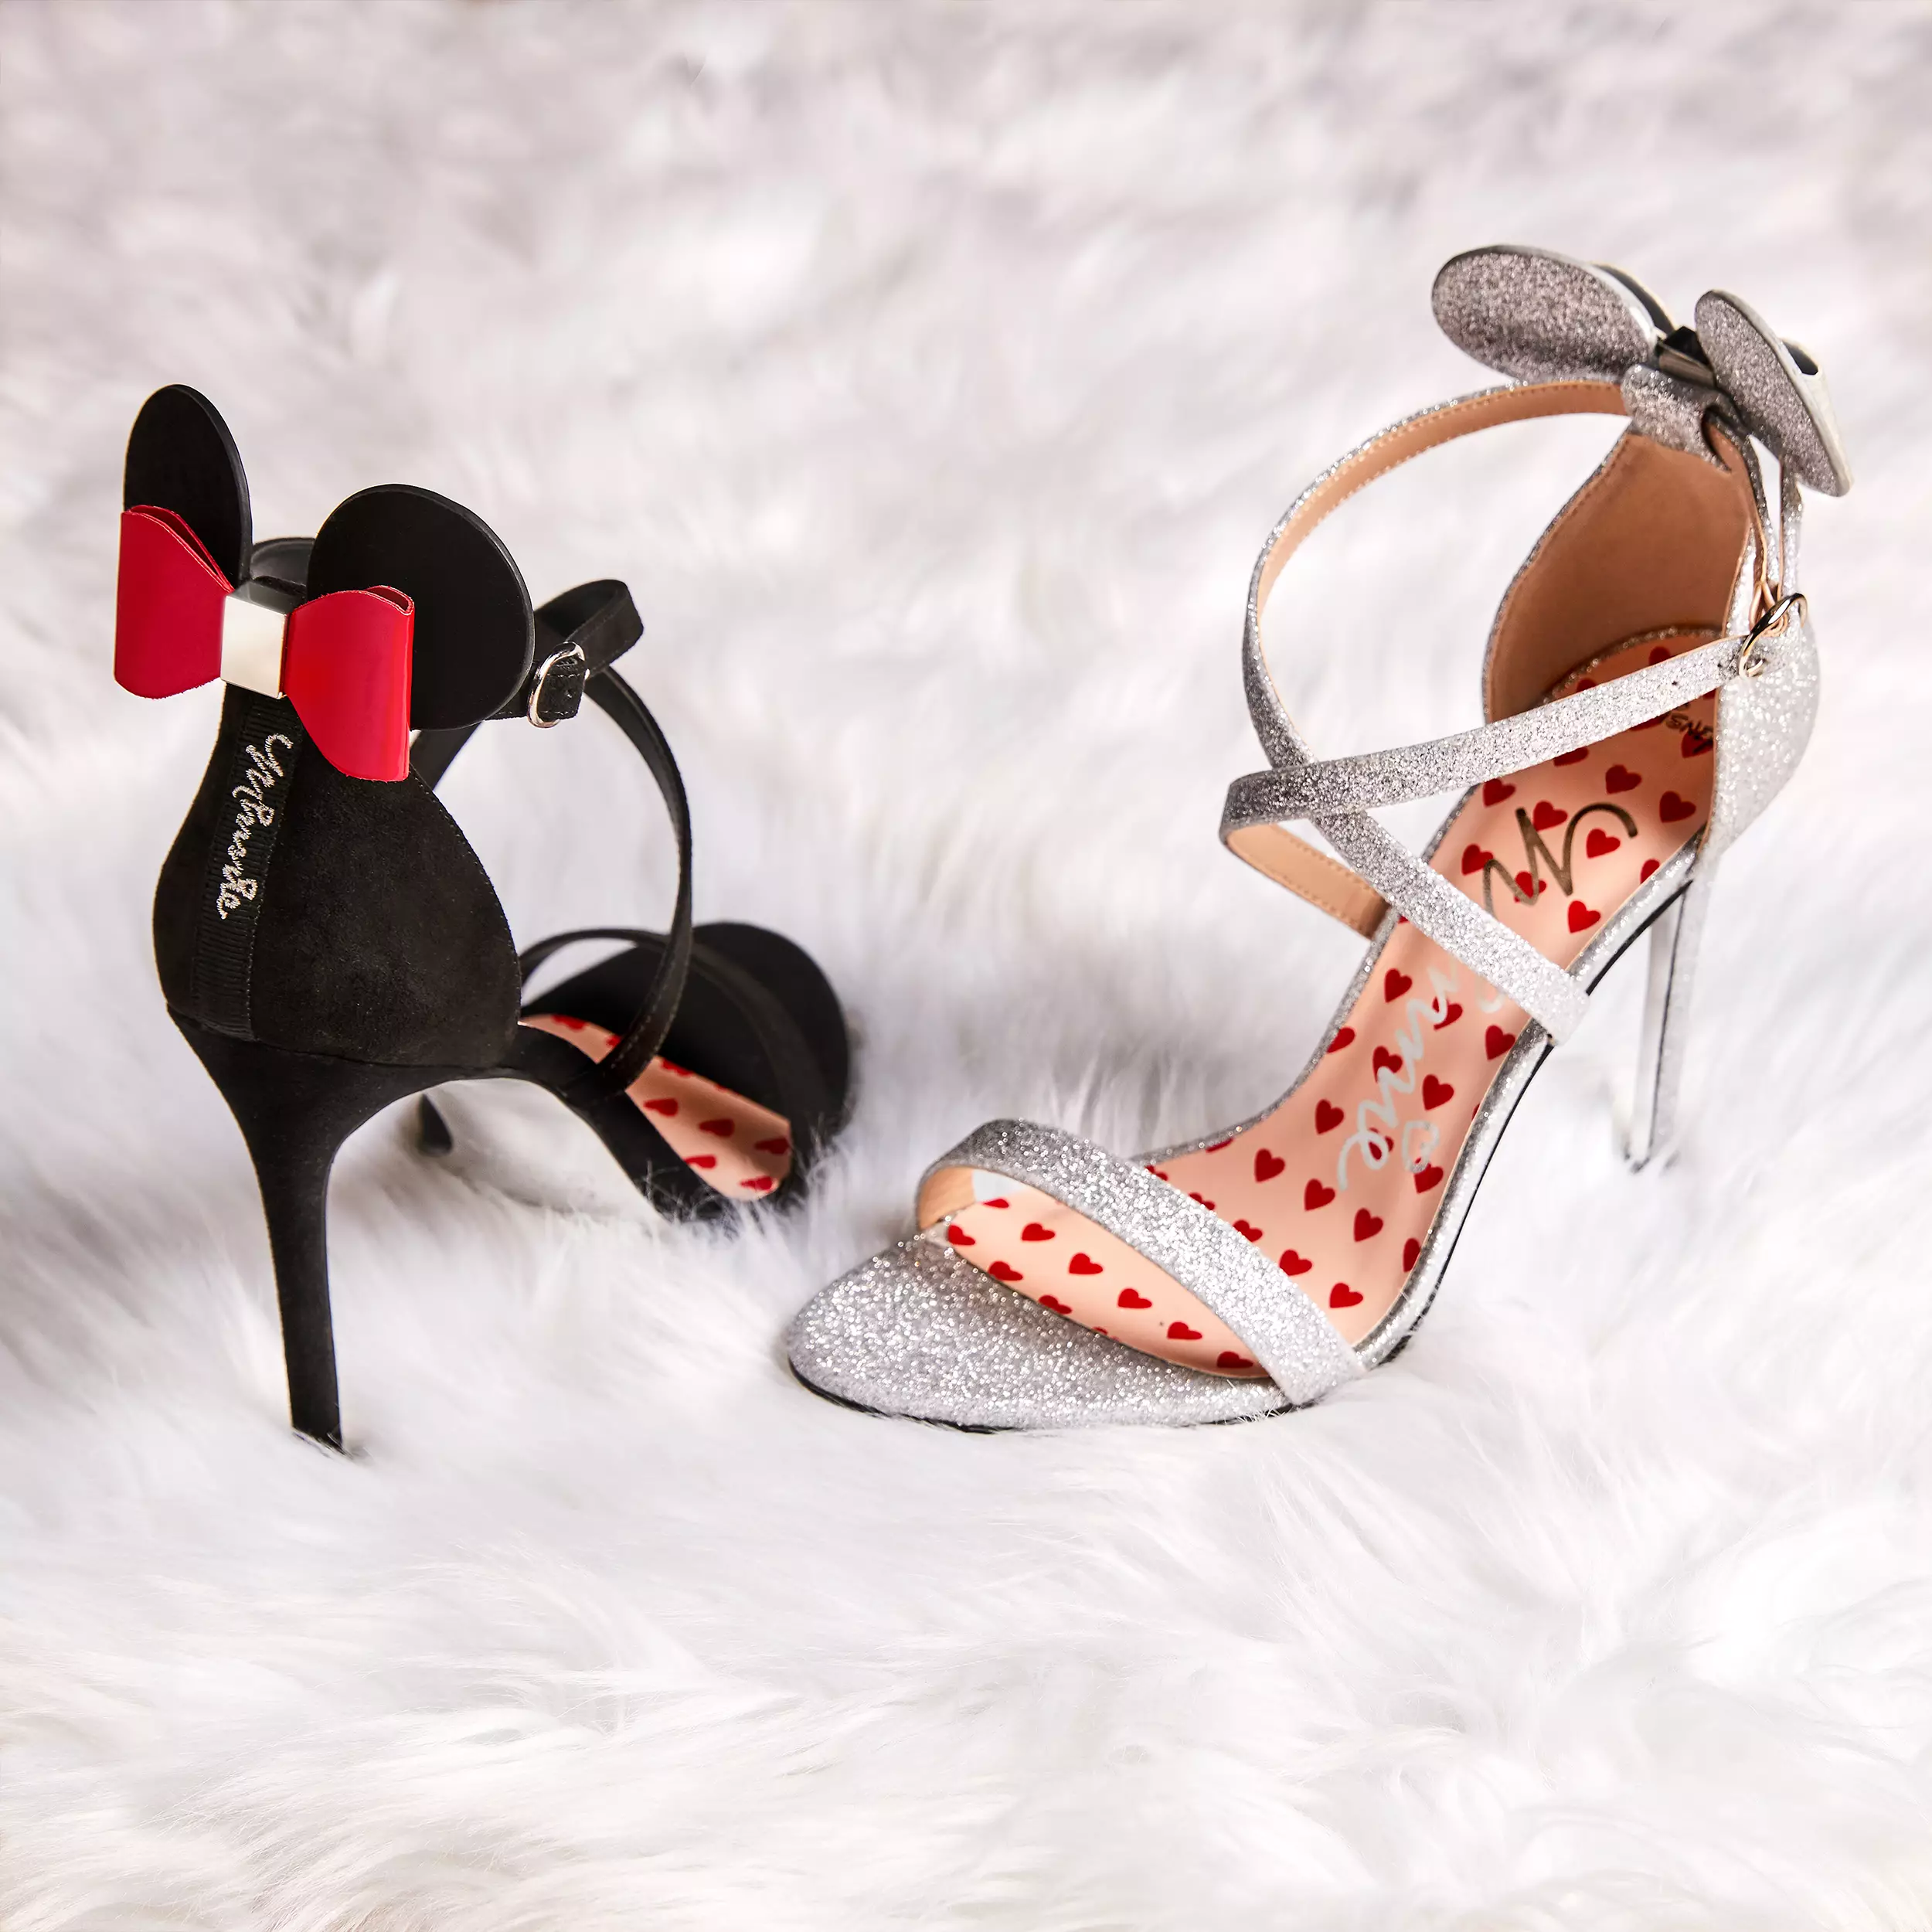 Primark are bringing back two new styles of the Minnie Mouse shoes in glittery silver and black velvet for £14 (